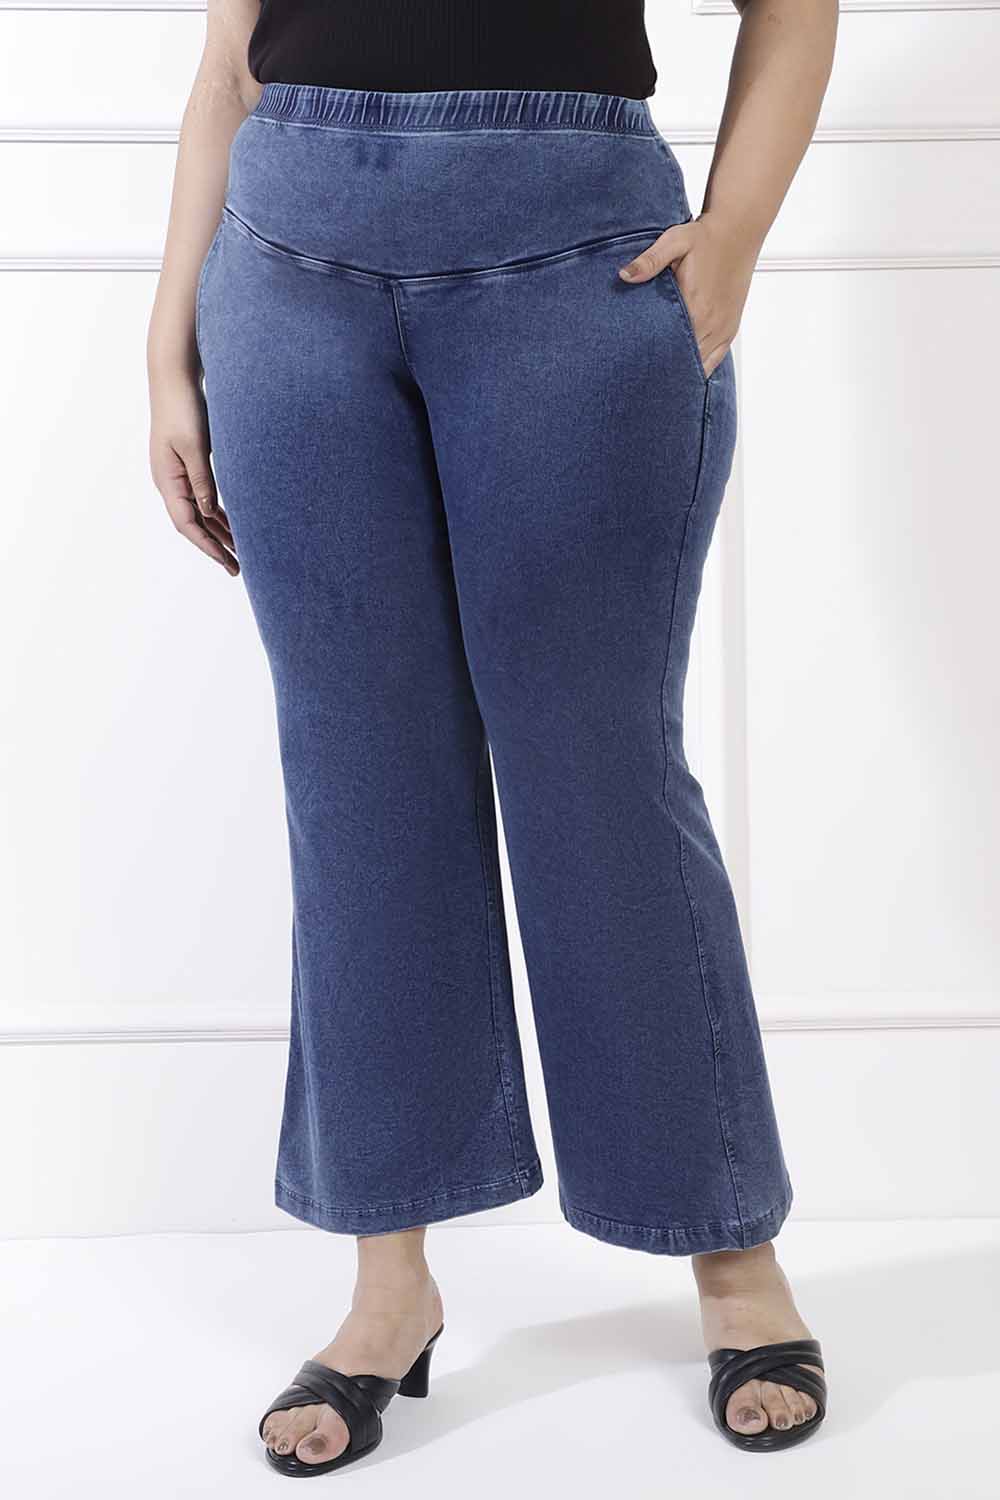 Yale Blue Flare Jeans